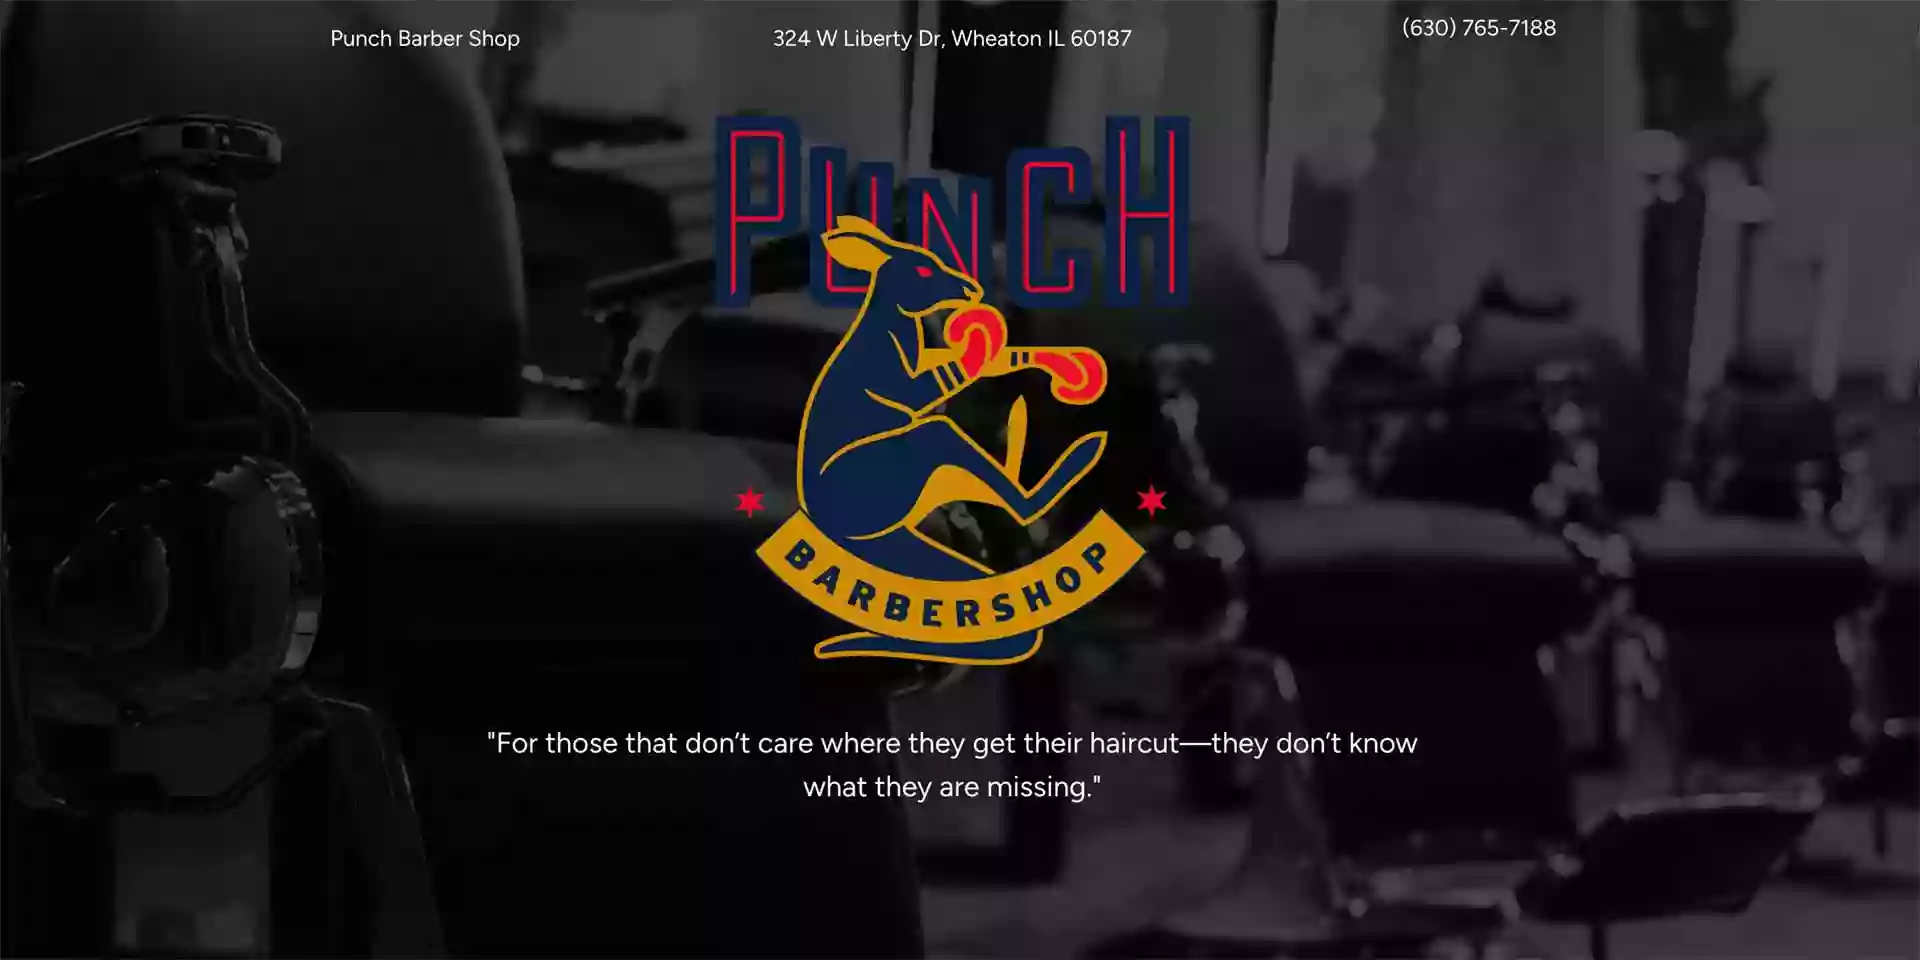 Punch Barber Shop of Wheaton